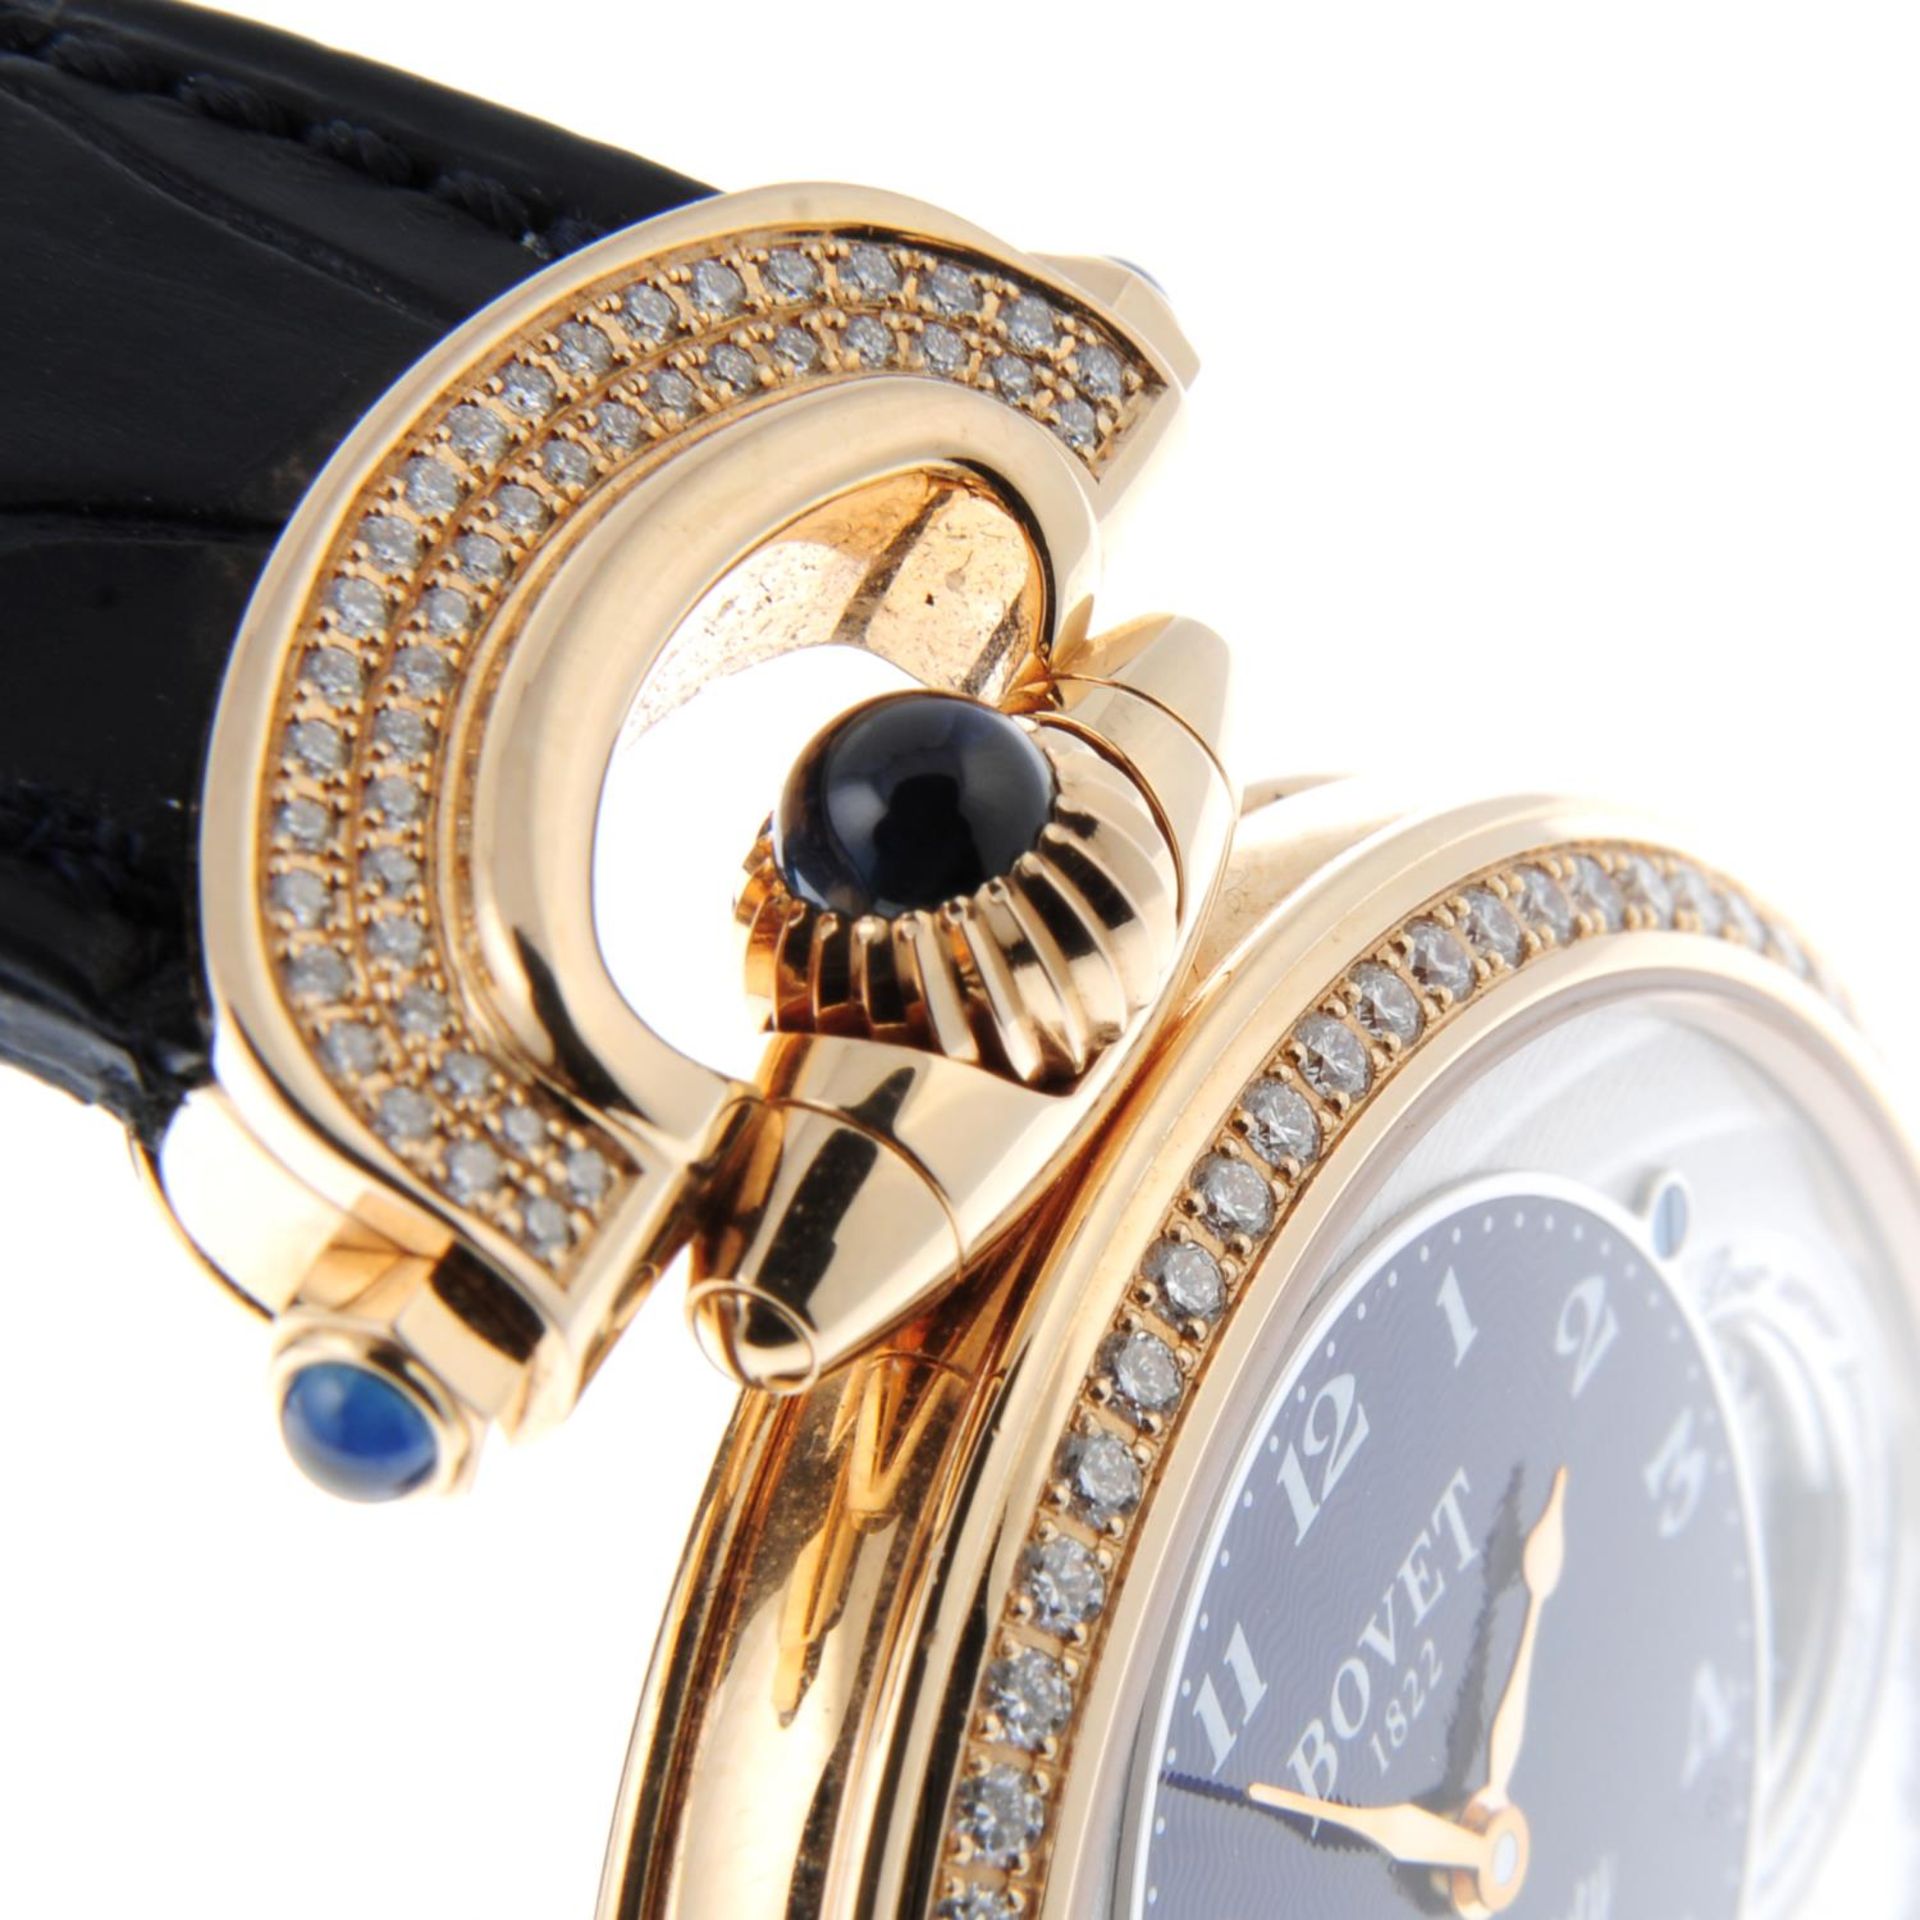 BOVET 1822 - a 19thirty Fleurier wrist watch. - Image 5 of 5